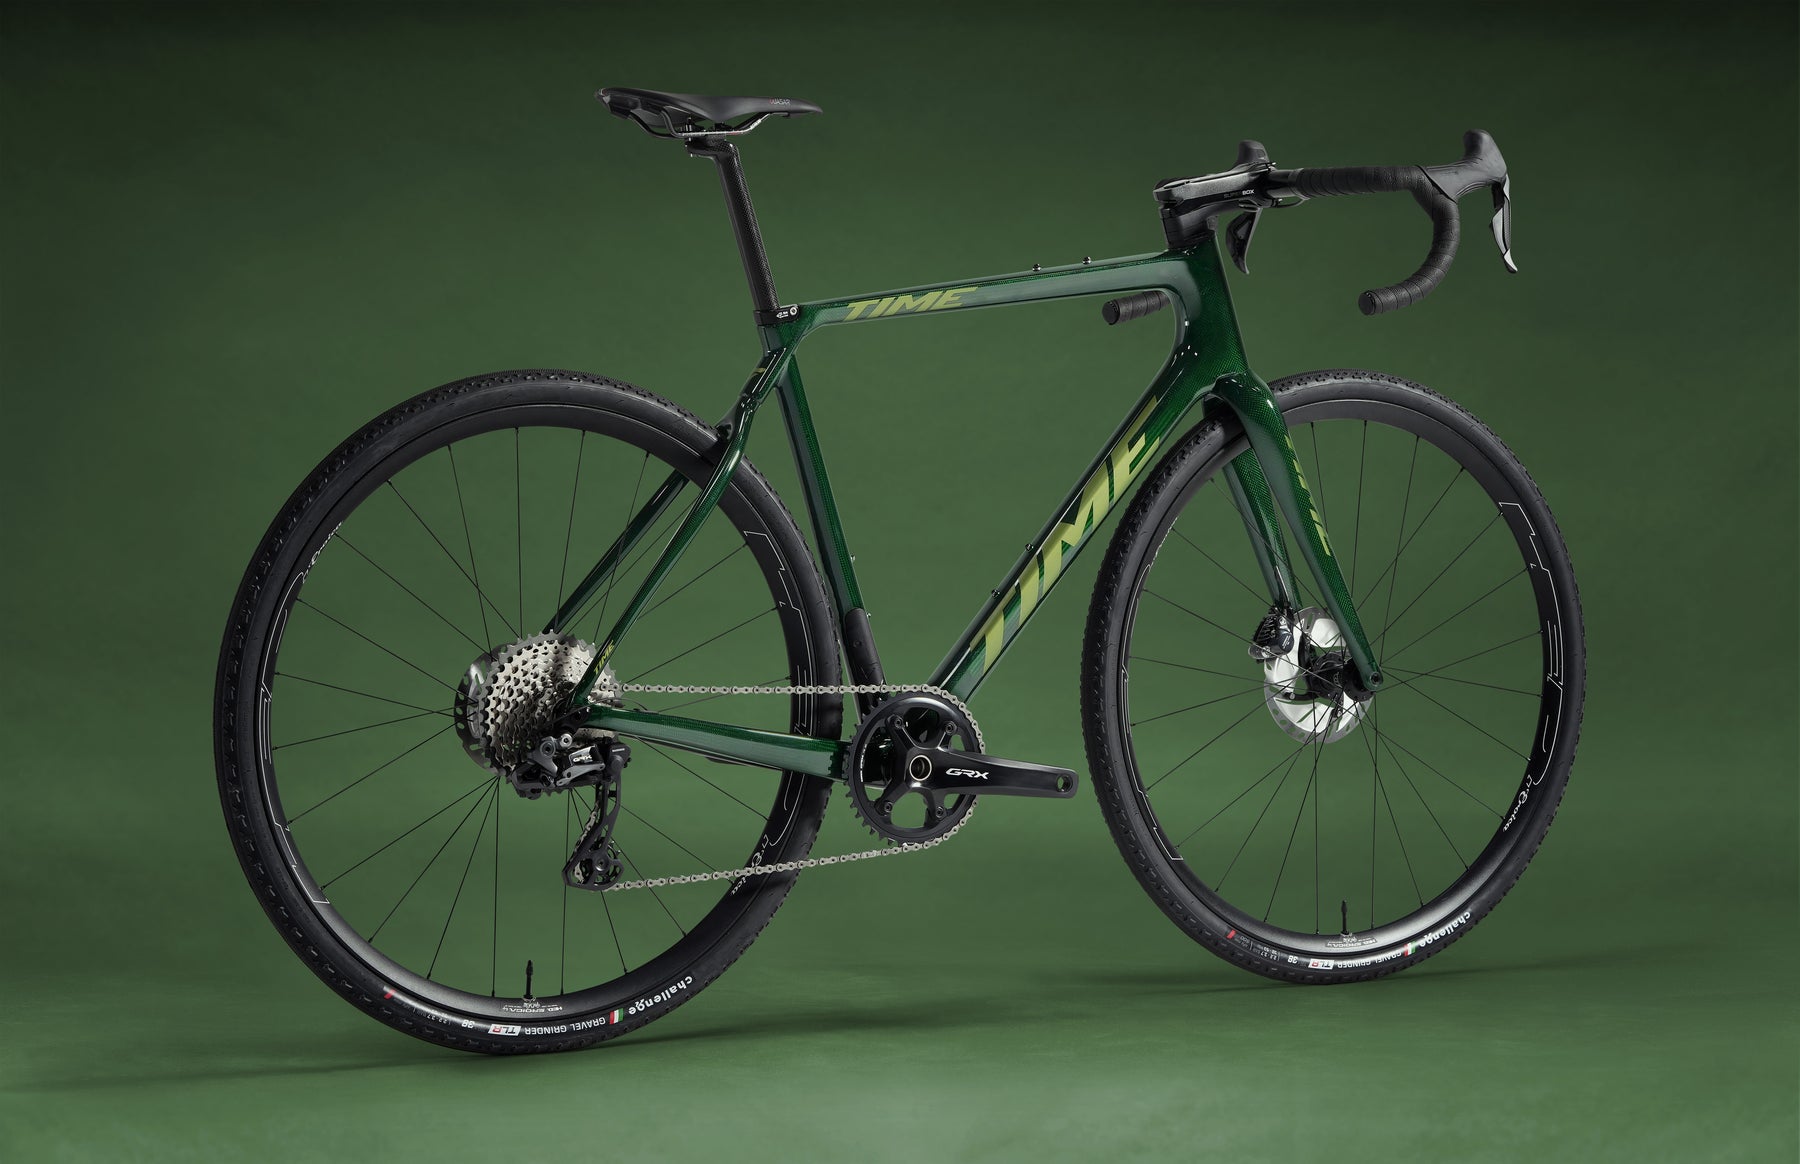 Time ADHX - SRAM Force 1x XPLR | Strictly Bicycles